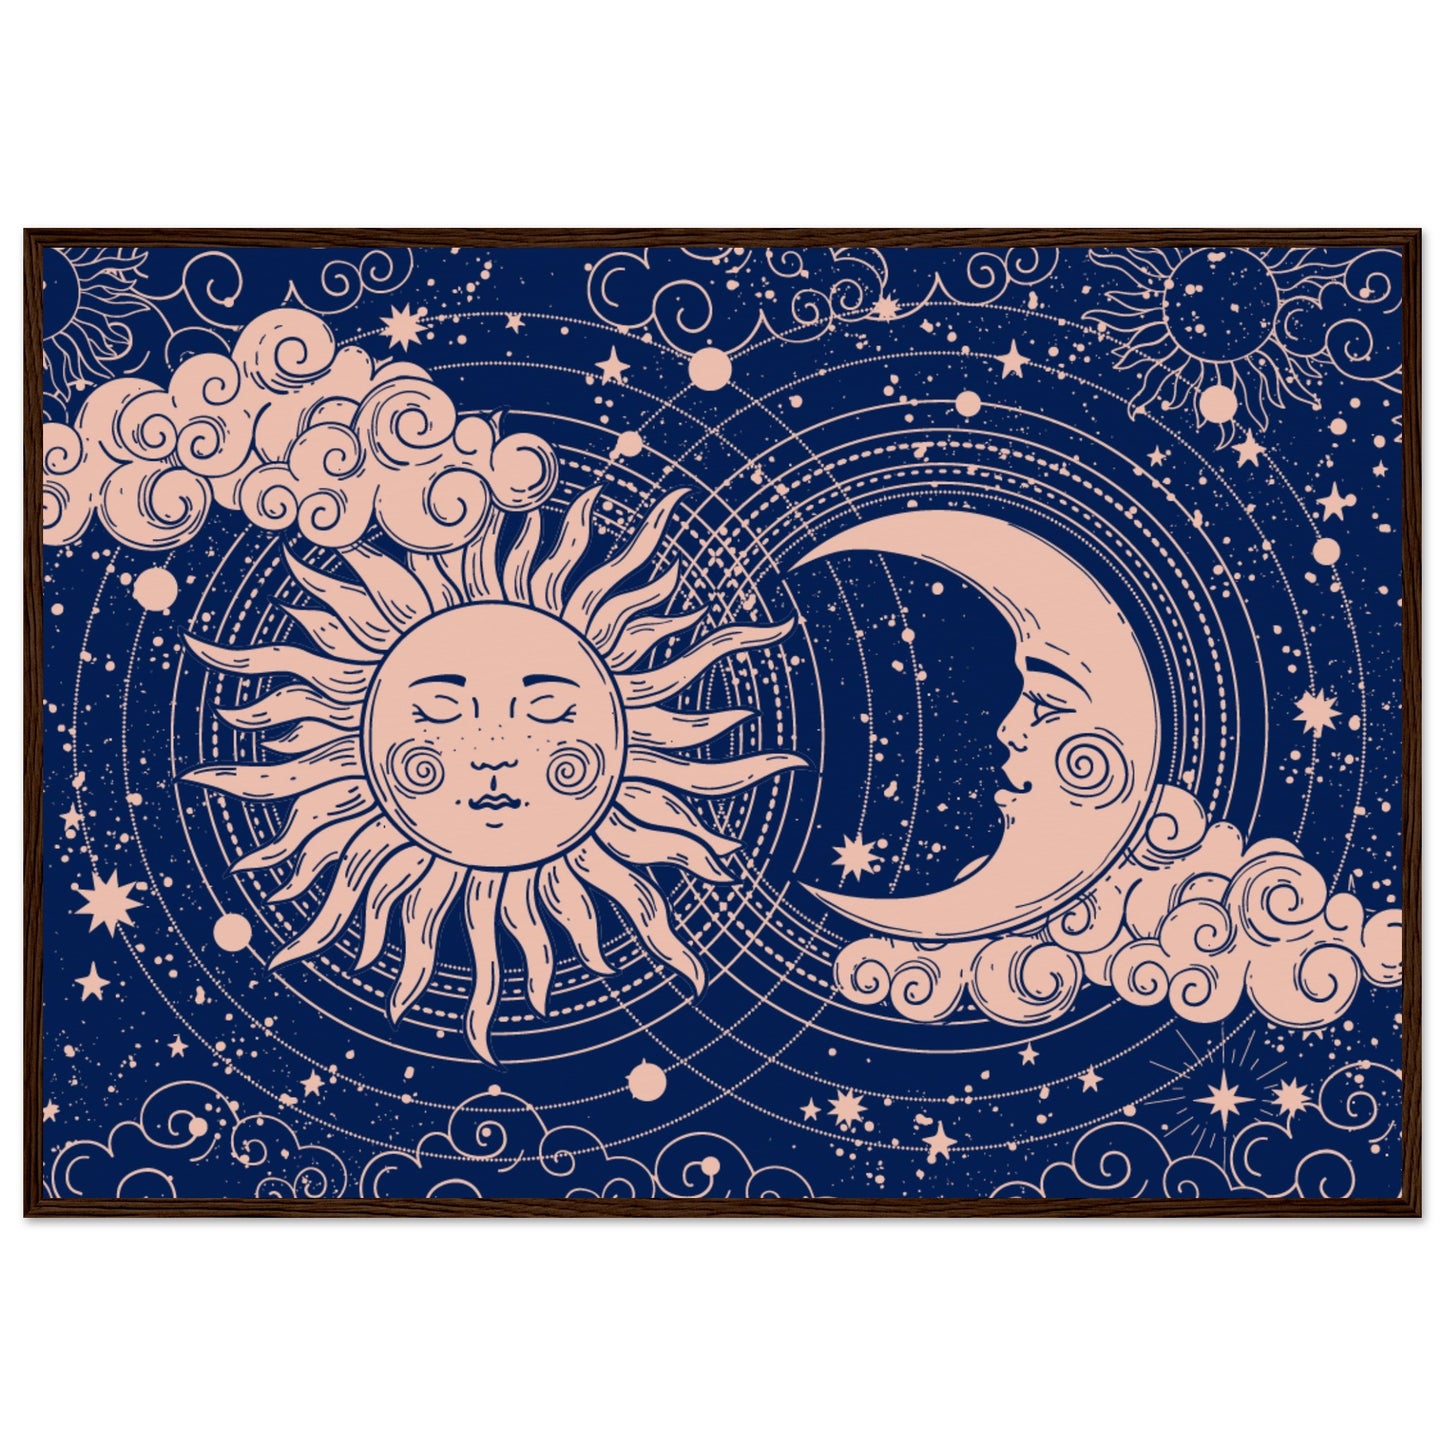 Crescent moon and sun